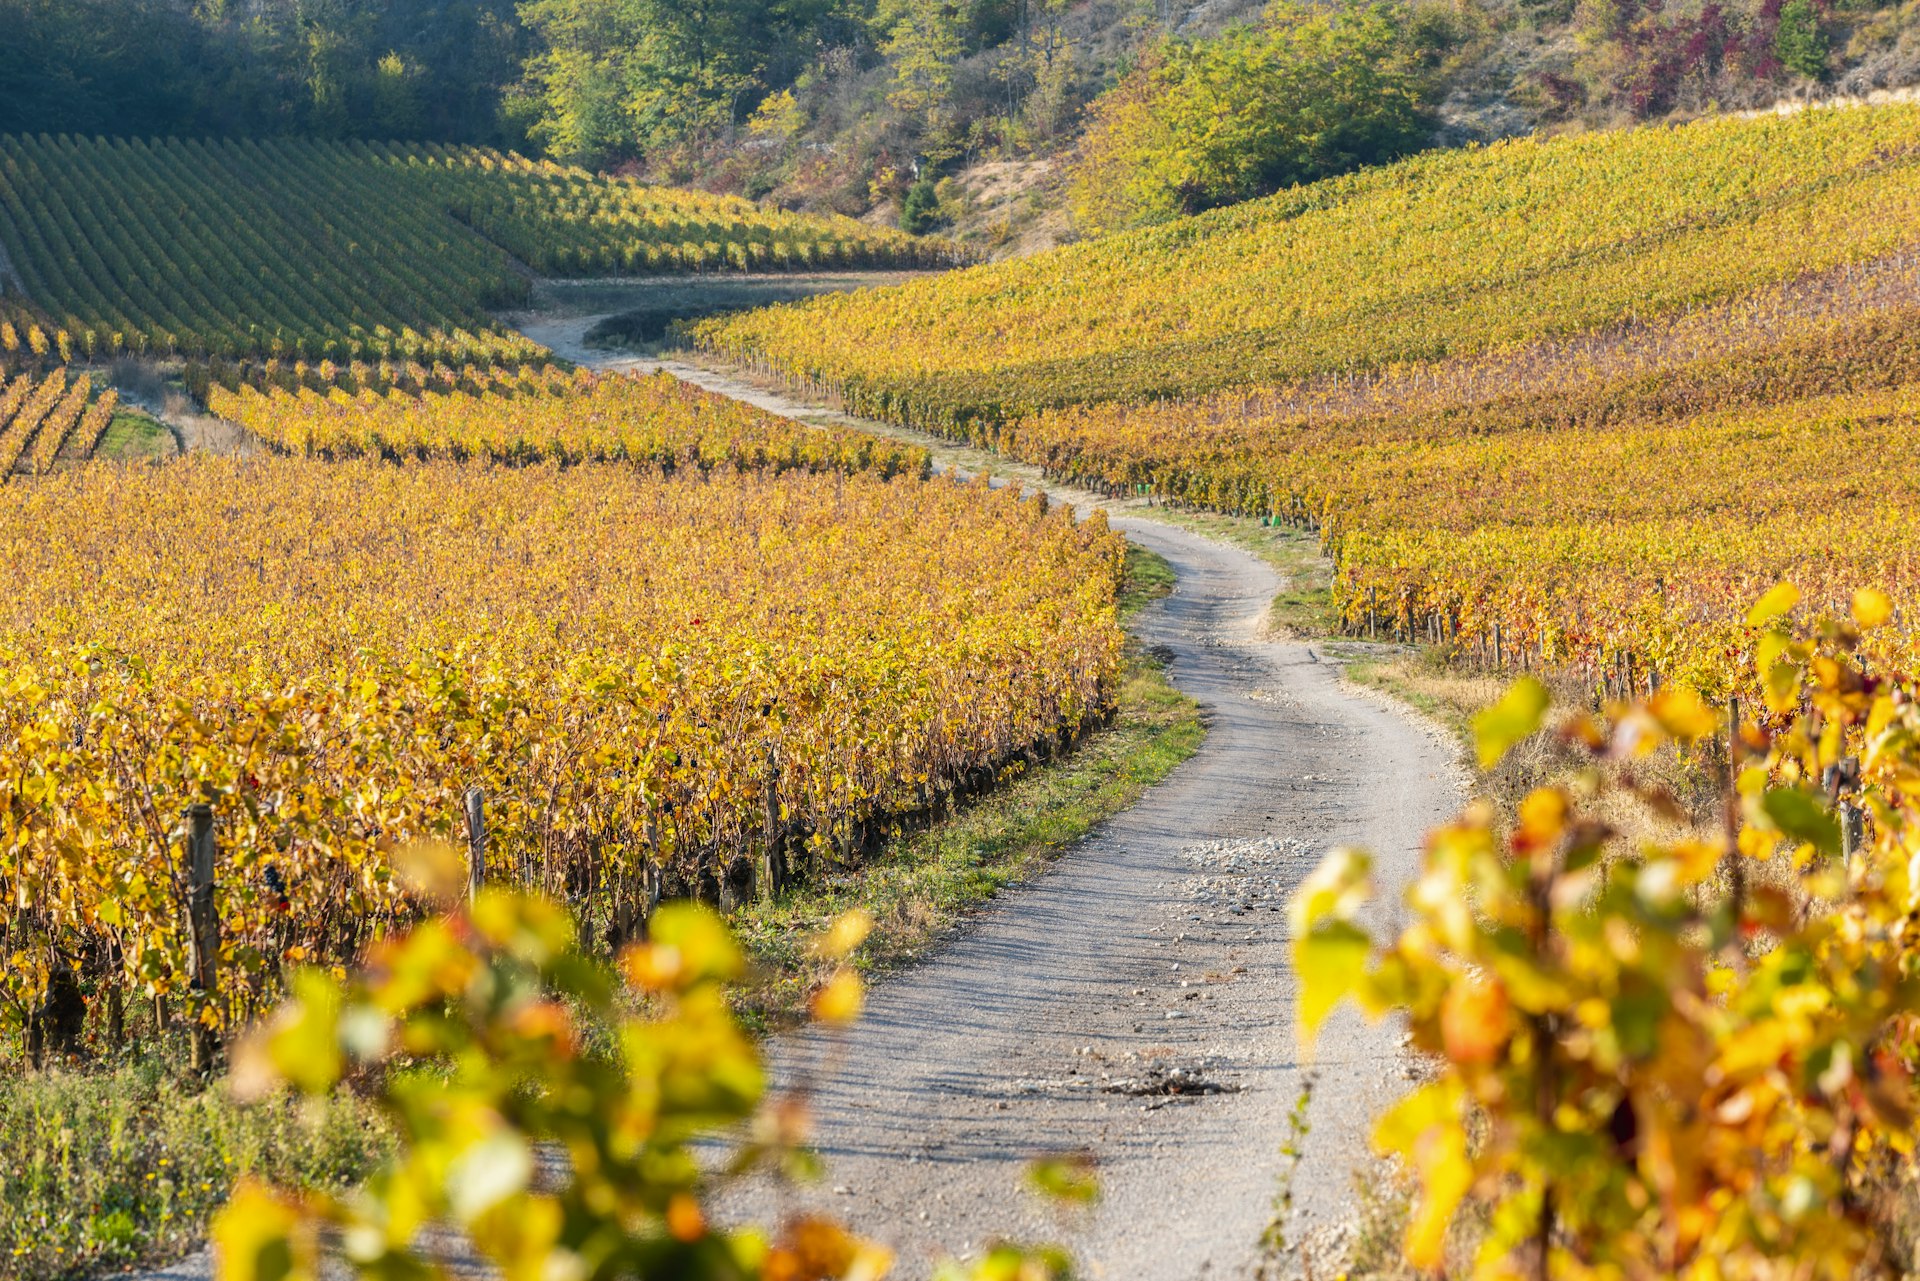 The golden colour of vineyards in Burgundy in the fall evening light. 